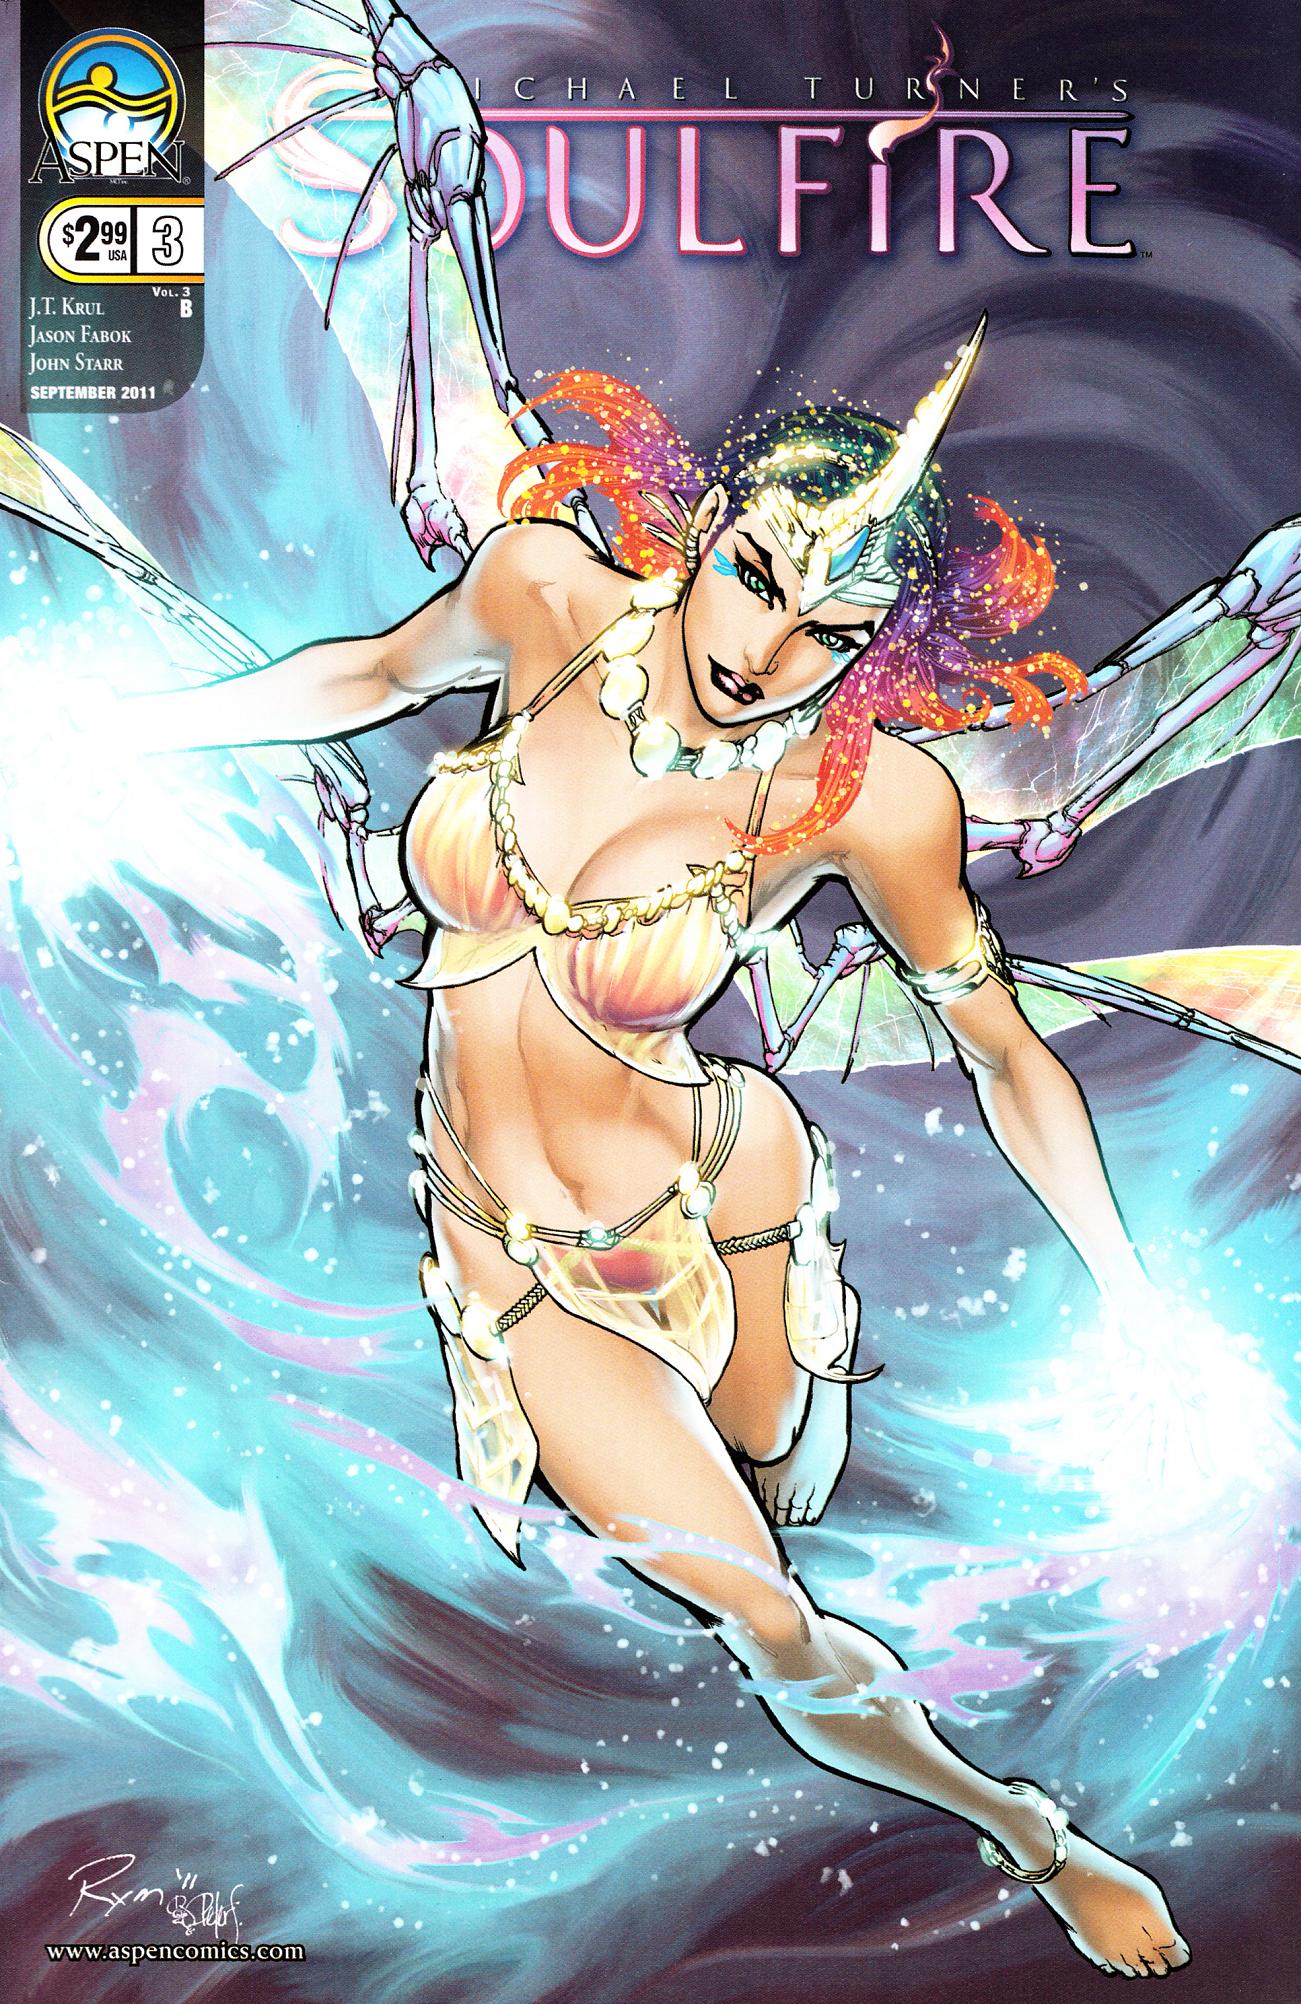 Read online Michael Turner's Soulfire (2011) comic -  Issue #3 - 1